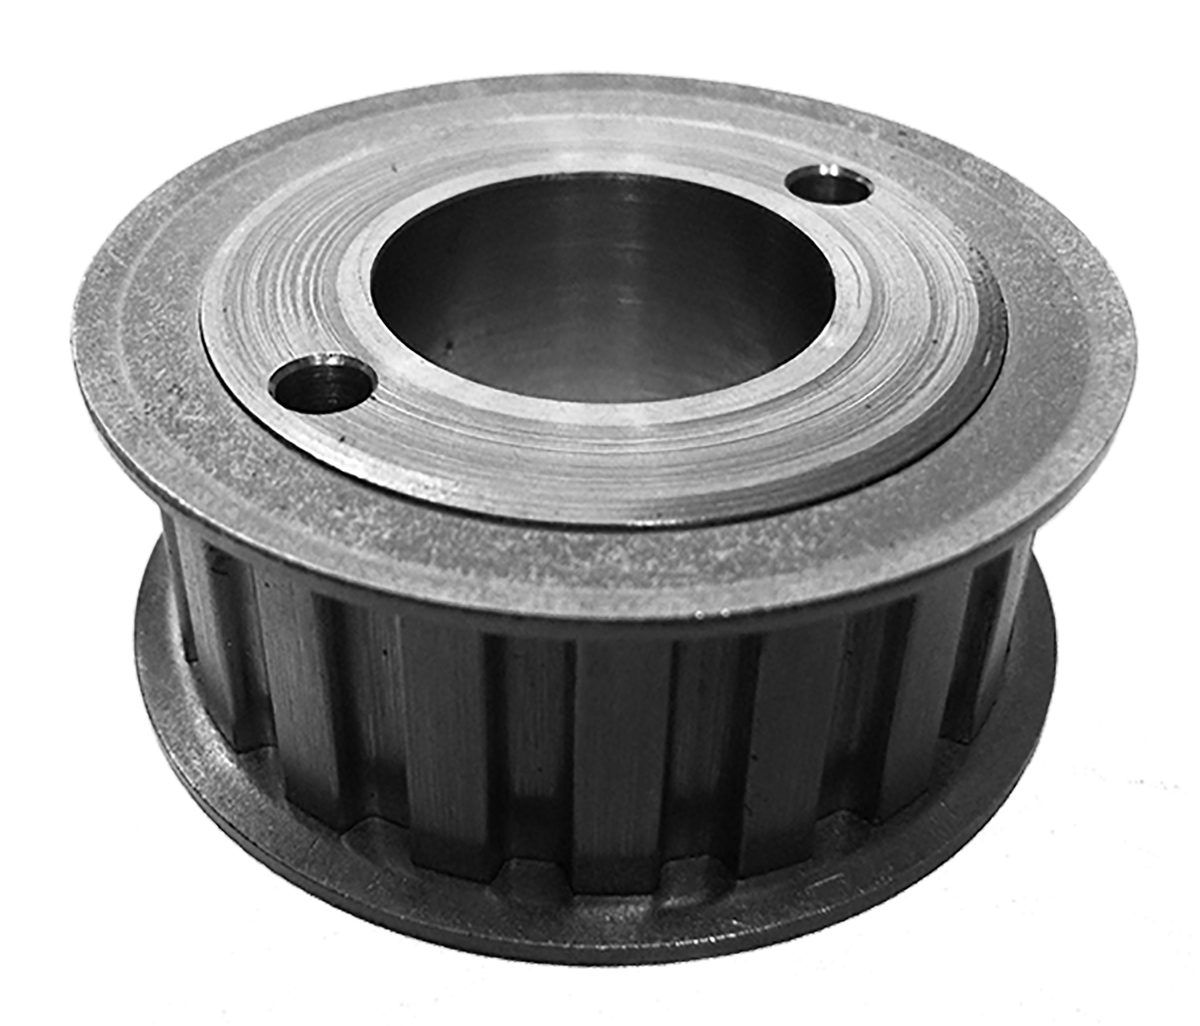 48LH075 - Cast Iron Imperial Pitch Pulleys